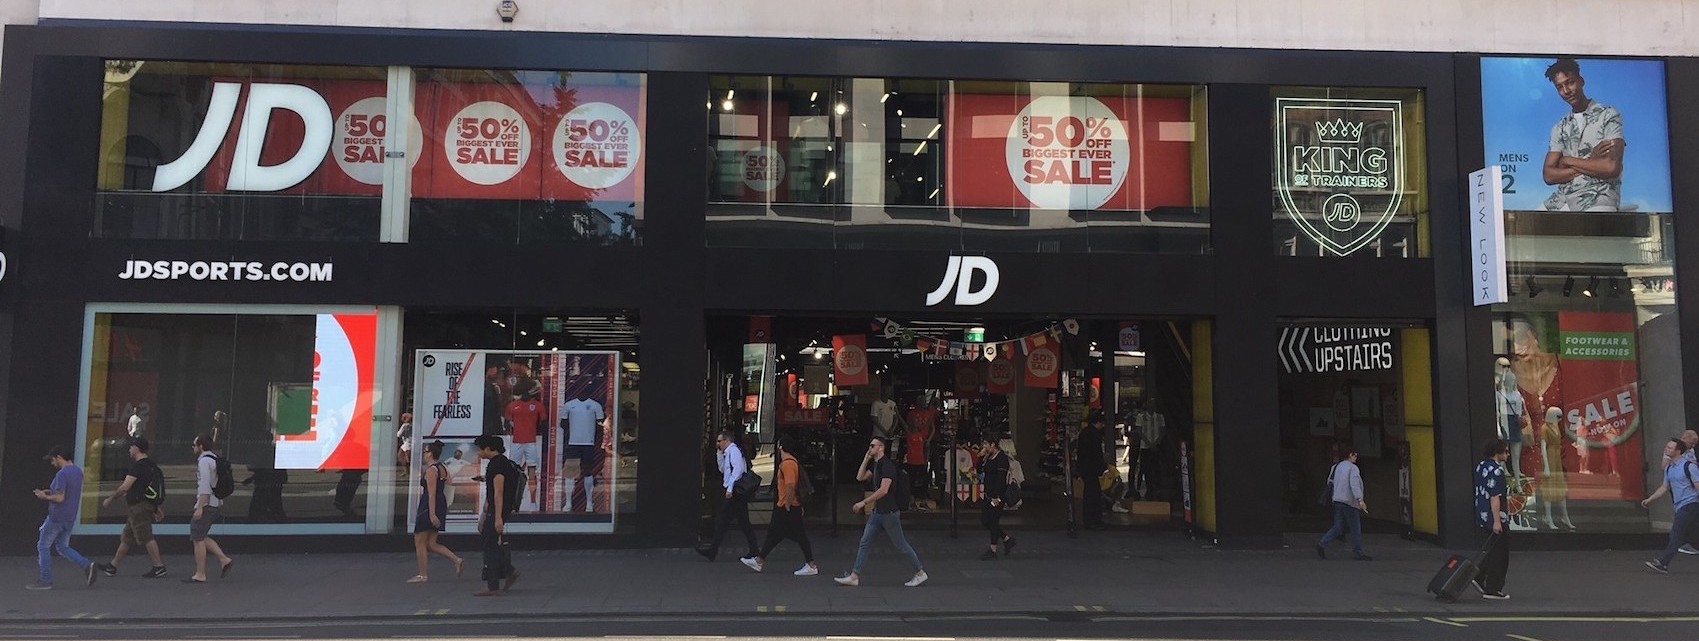 Technology for In-Store Experiences at JD Sports